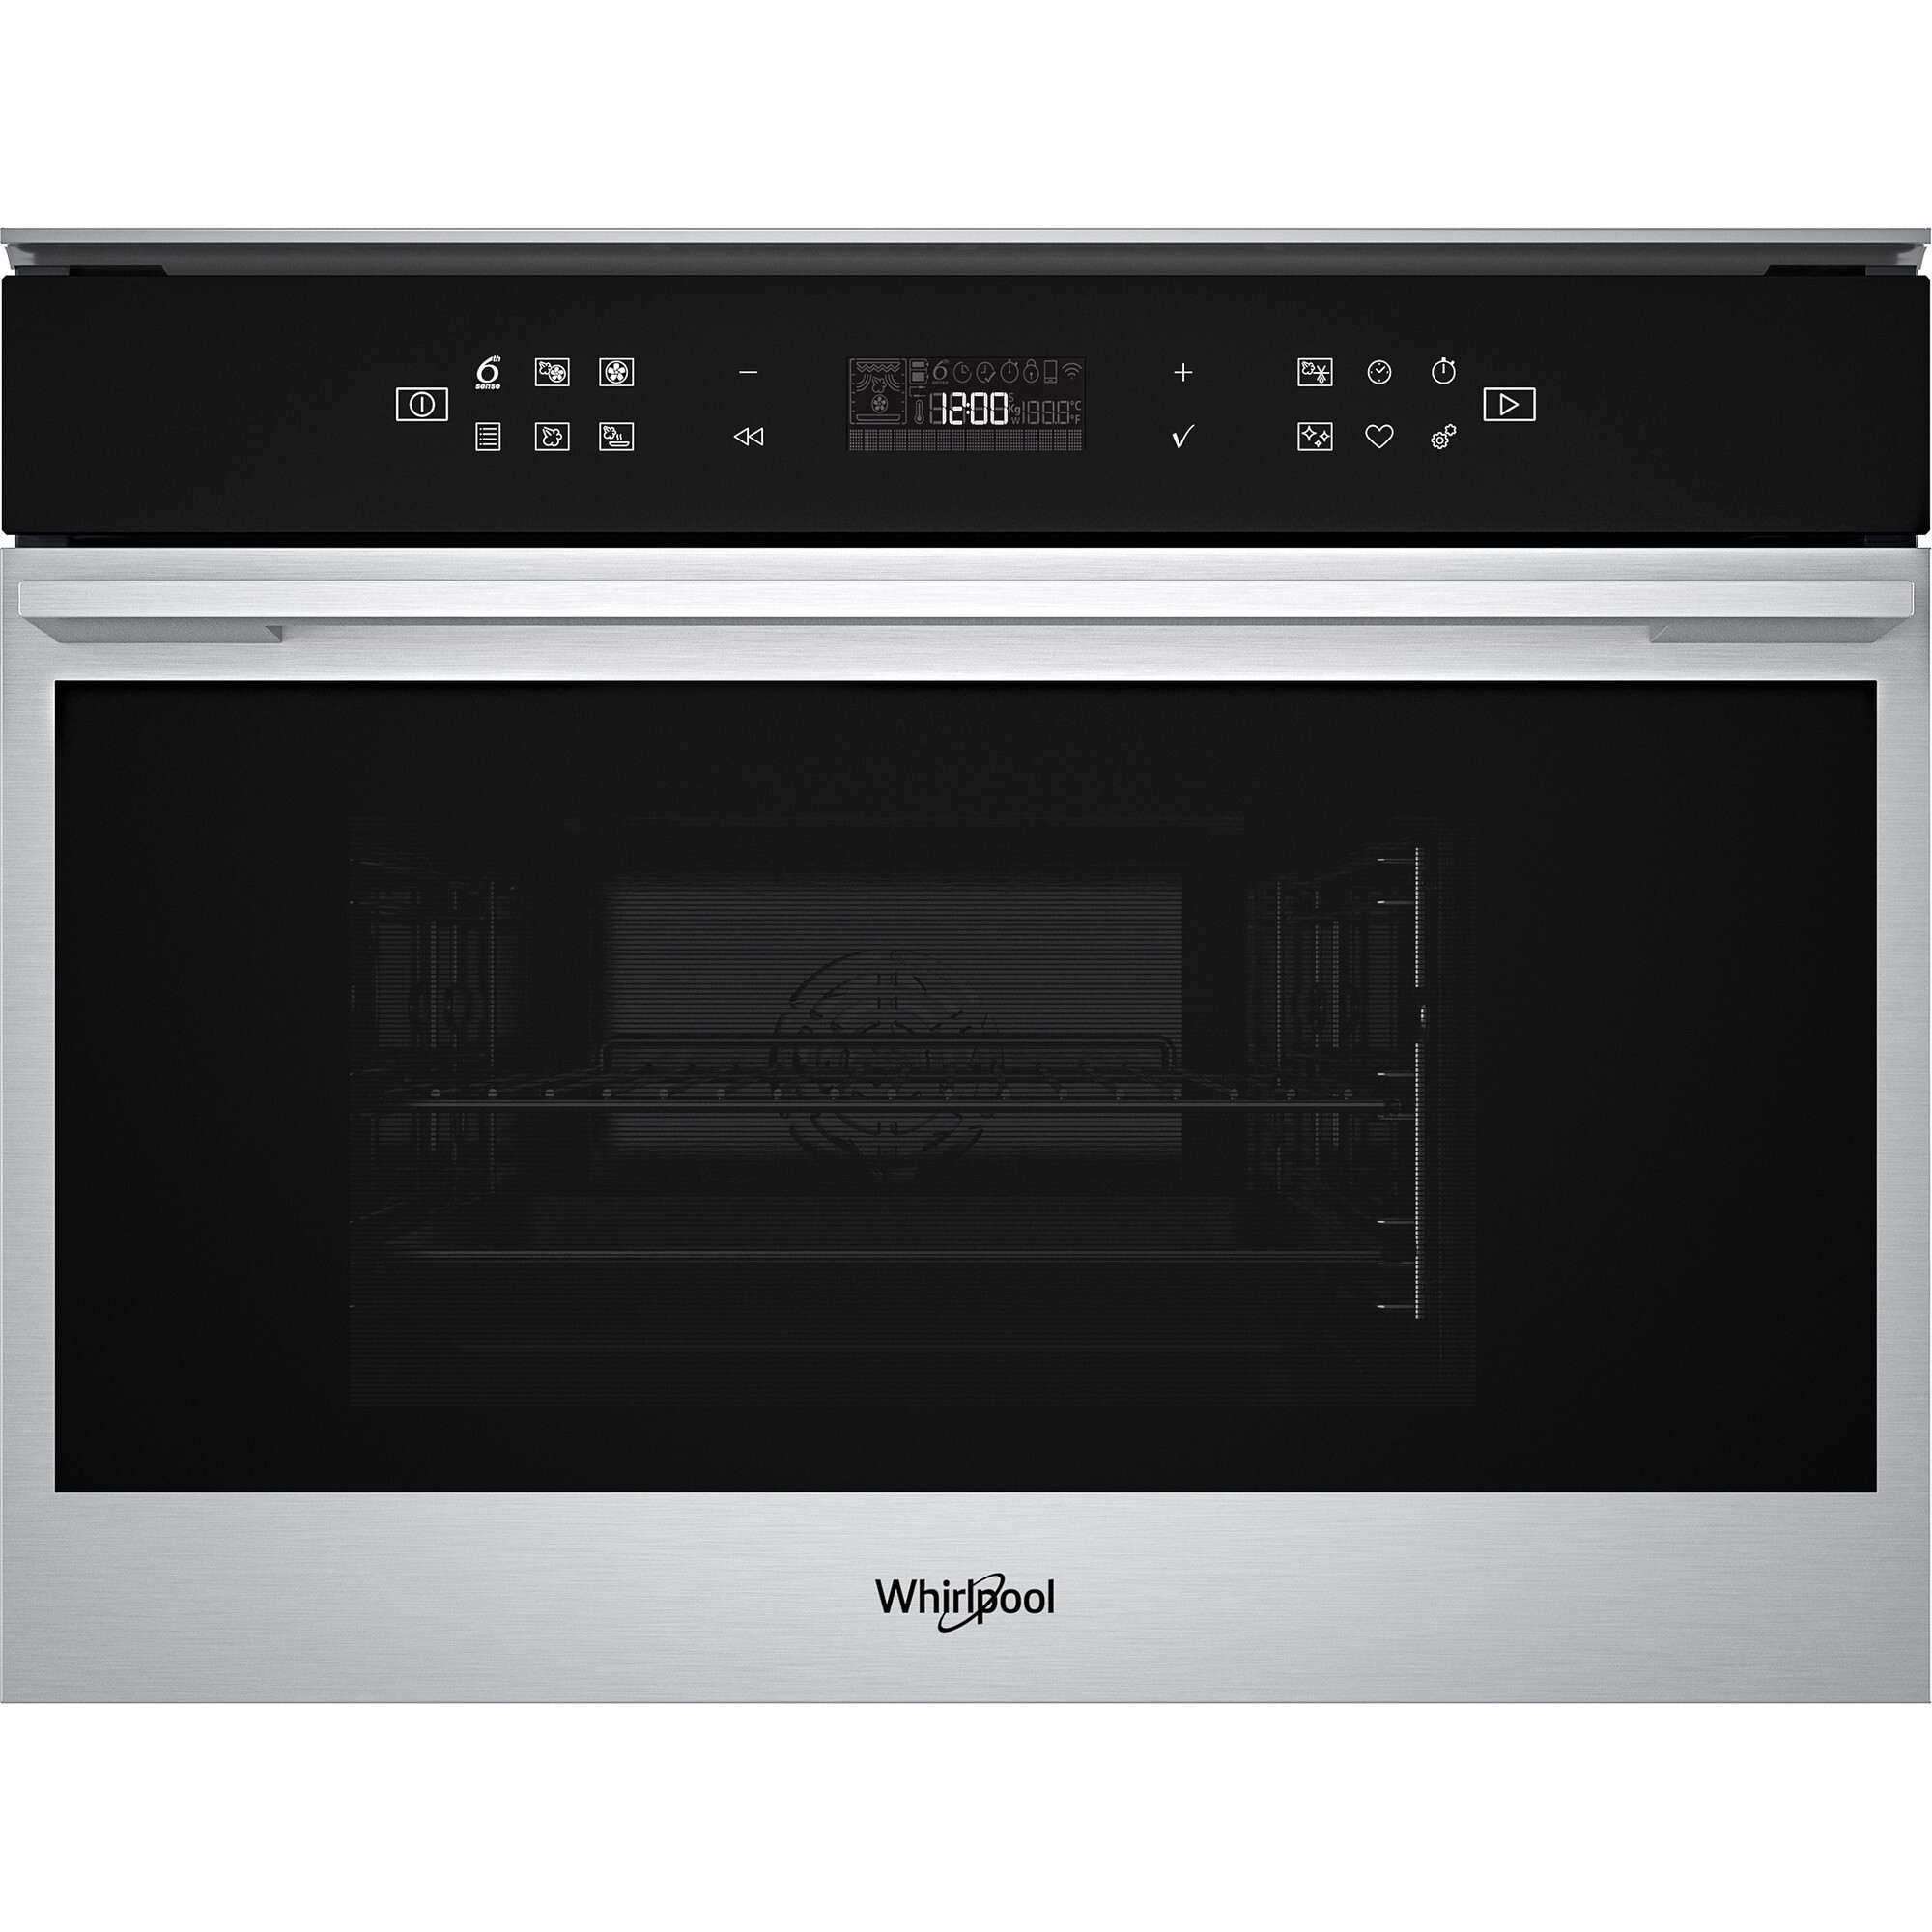 Whirlpool  W7 MS450 STEAM-OVEN WP